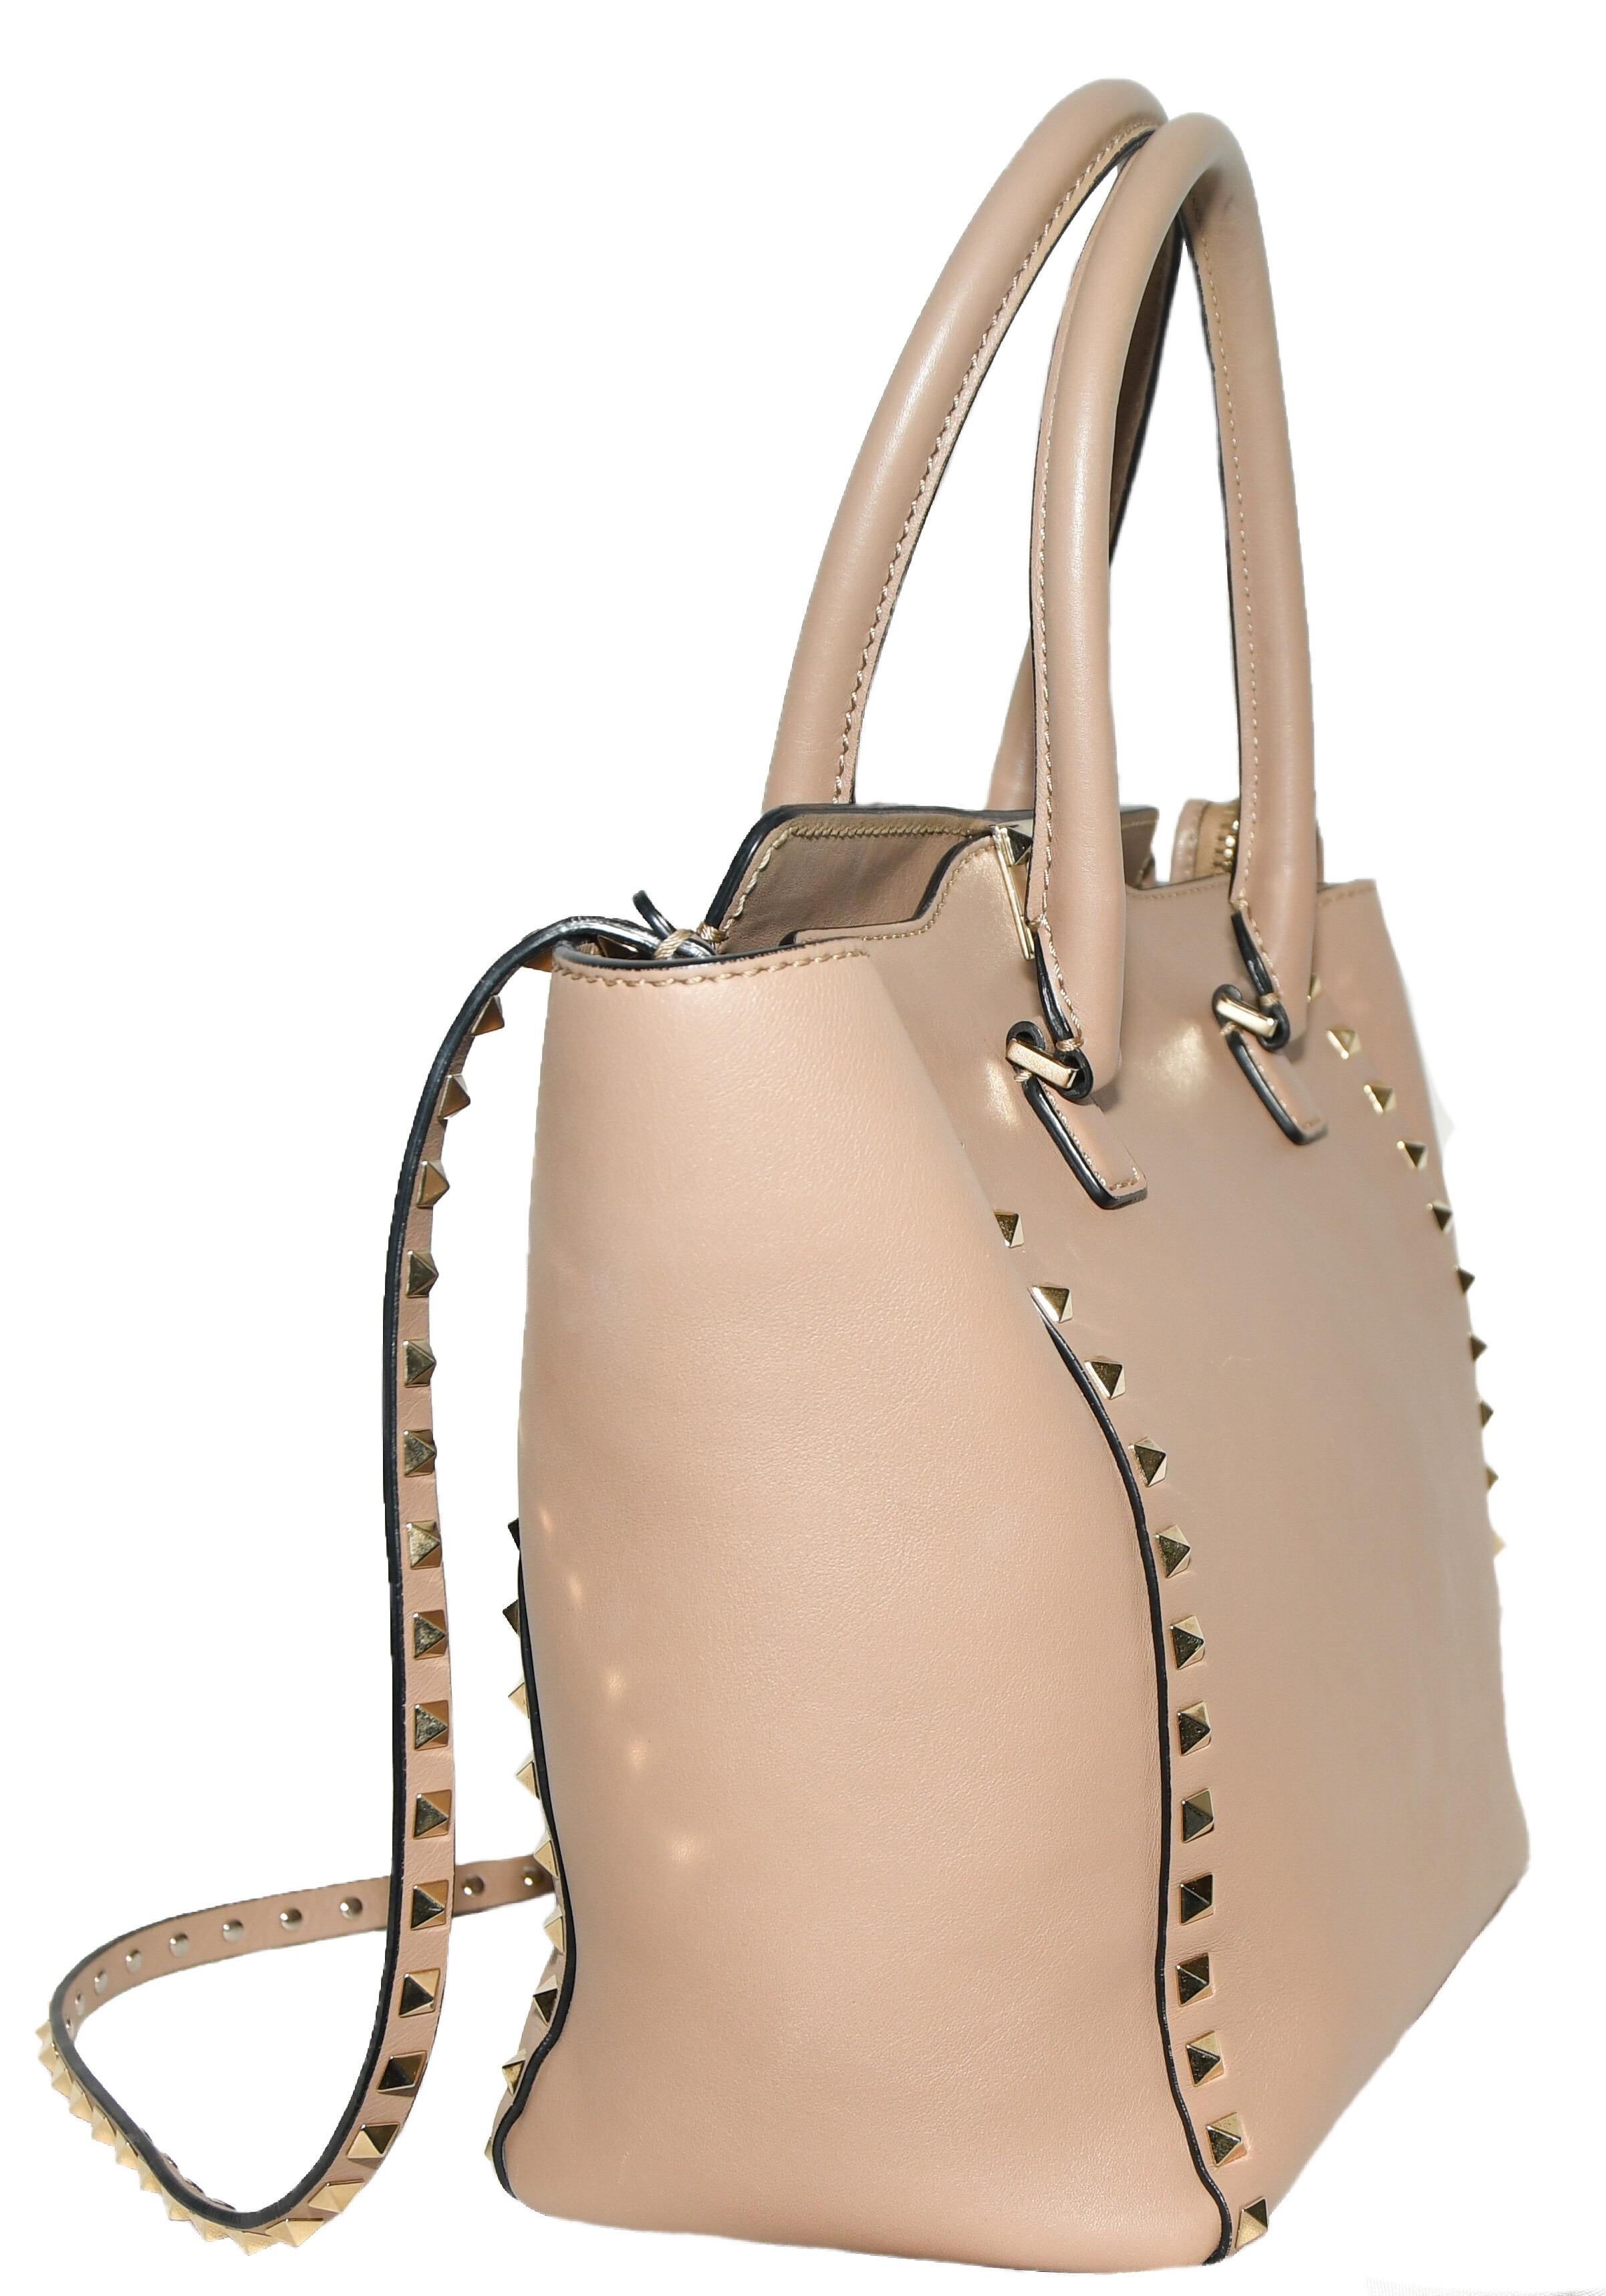 Beige Valentino Rockstud Top Handle Taupe Leather Tote Bag